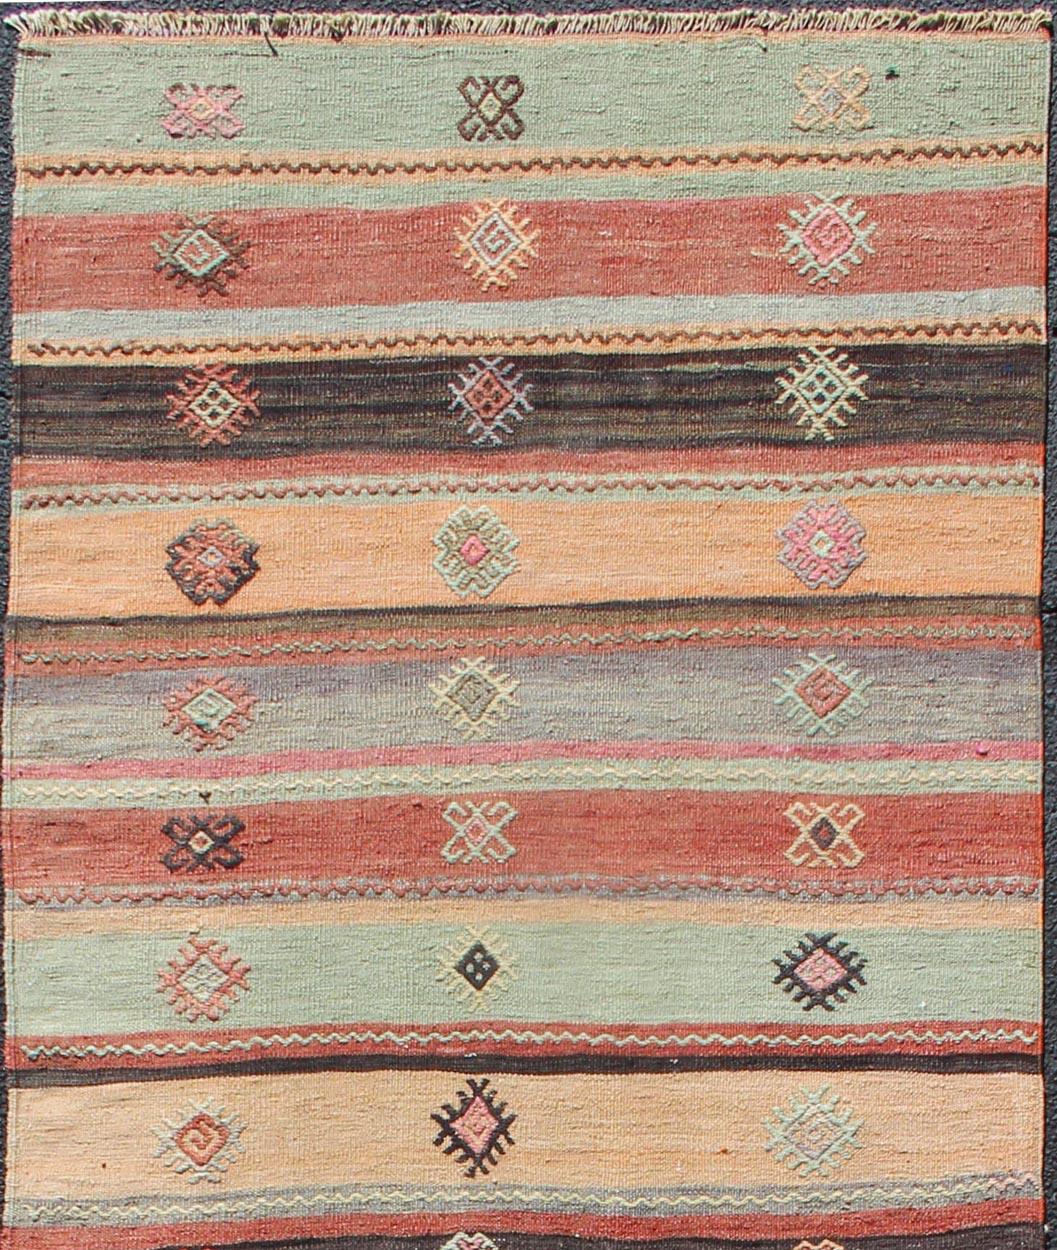 Geometric stripe design Kilim runner in multi-colors, rug TU-NED-628, country of origin / type: Turkey / Kilim, circa 1950

This vintage Kilim displays an array of designs, including a striped pattern and small geometric prints. The designs are